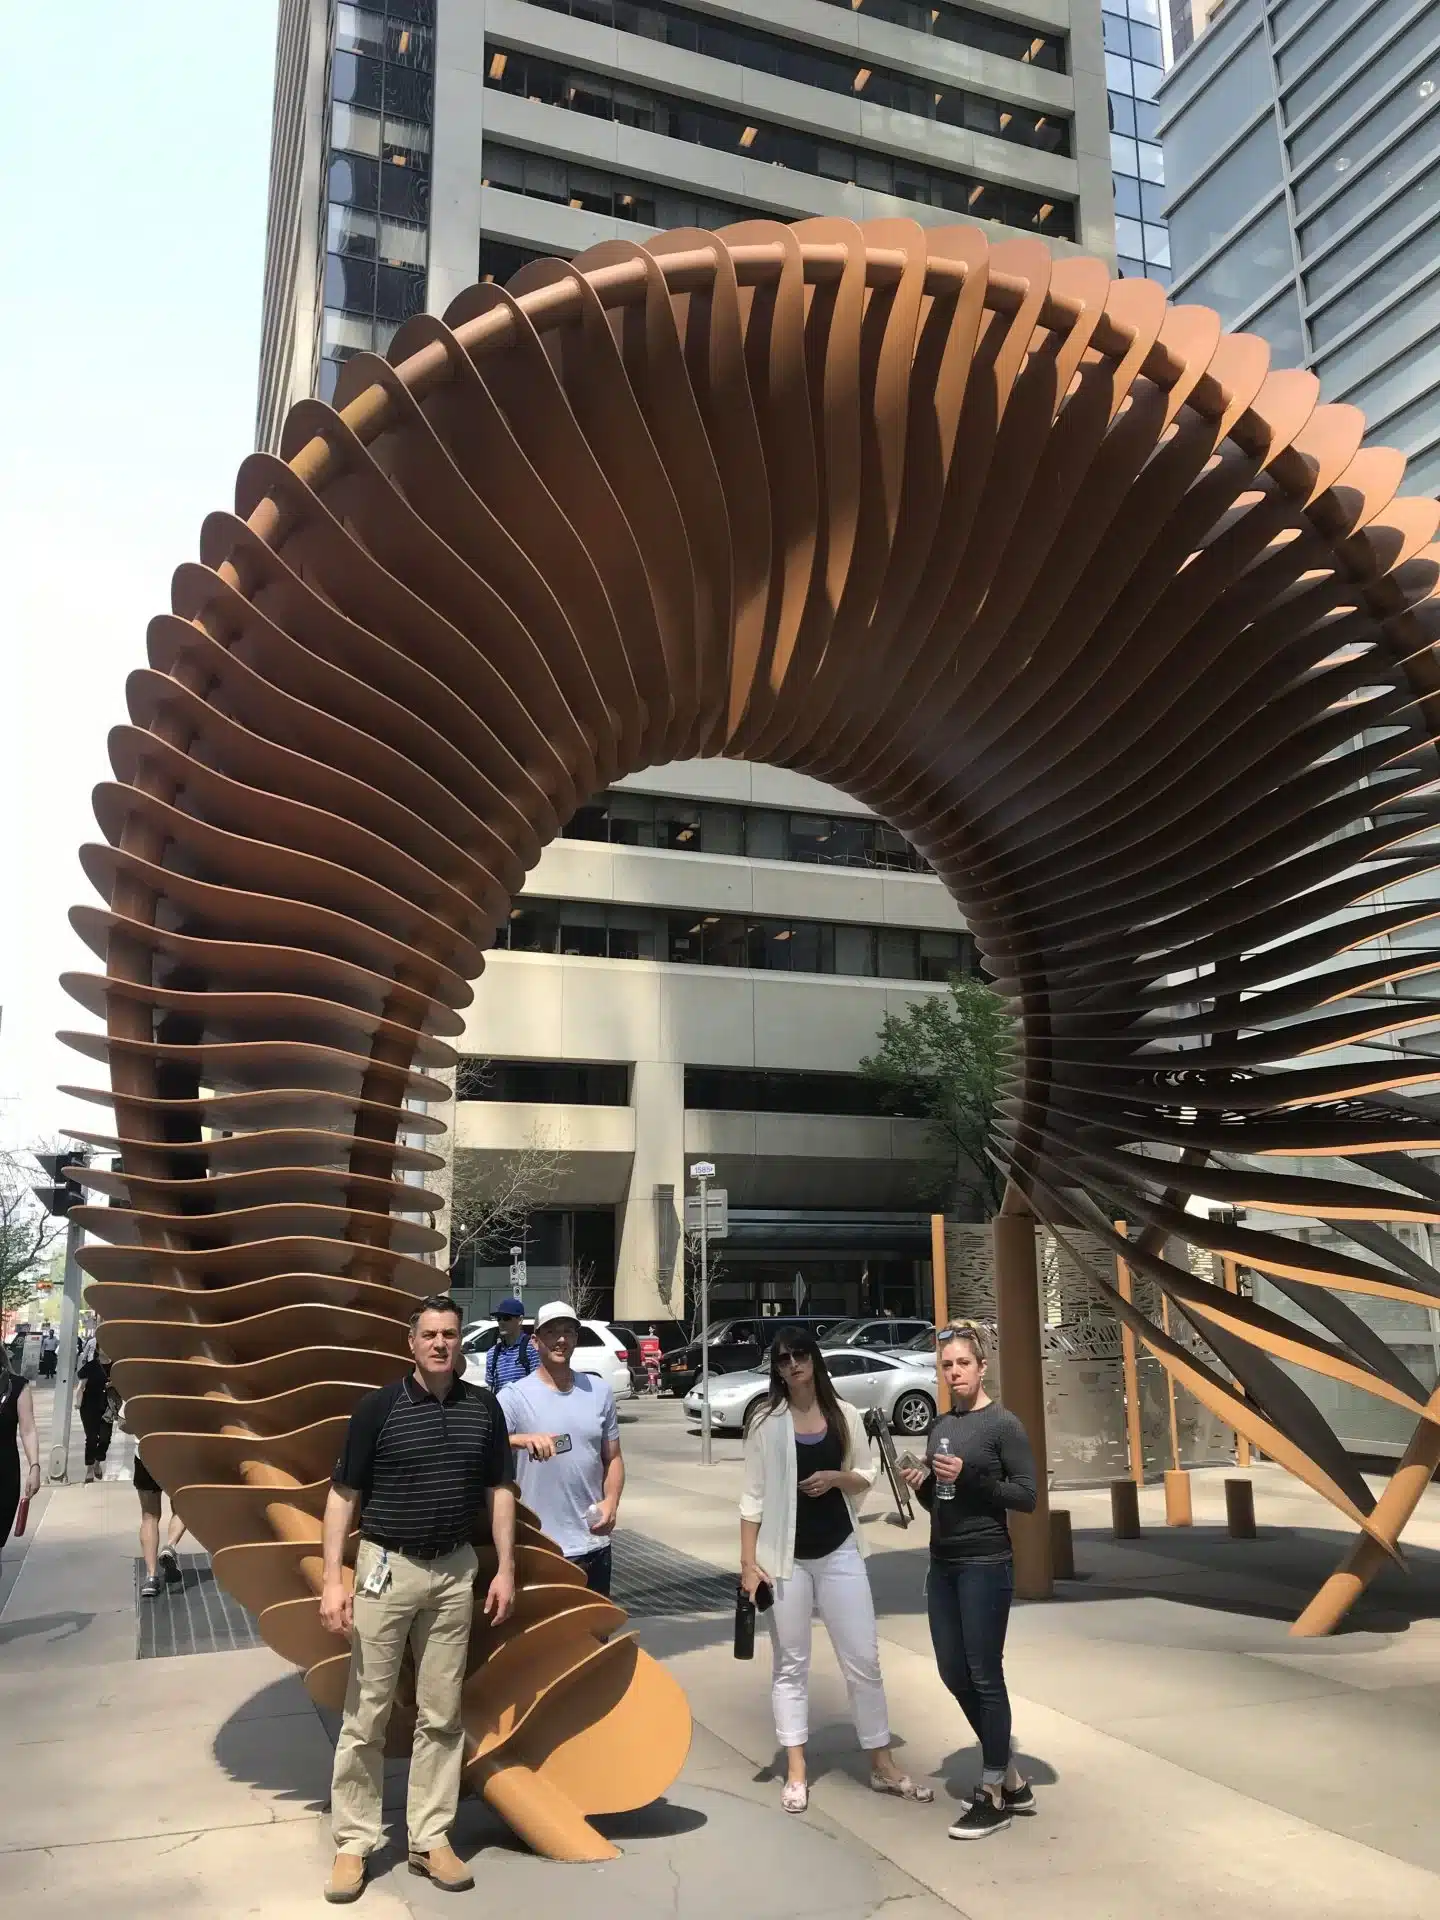 Scavenger hunt participants pose with a curved sculpture in Calgary